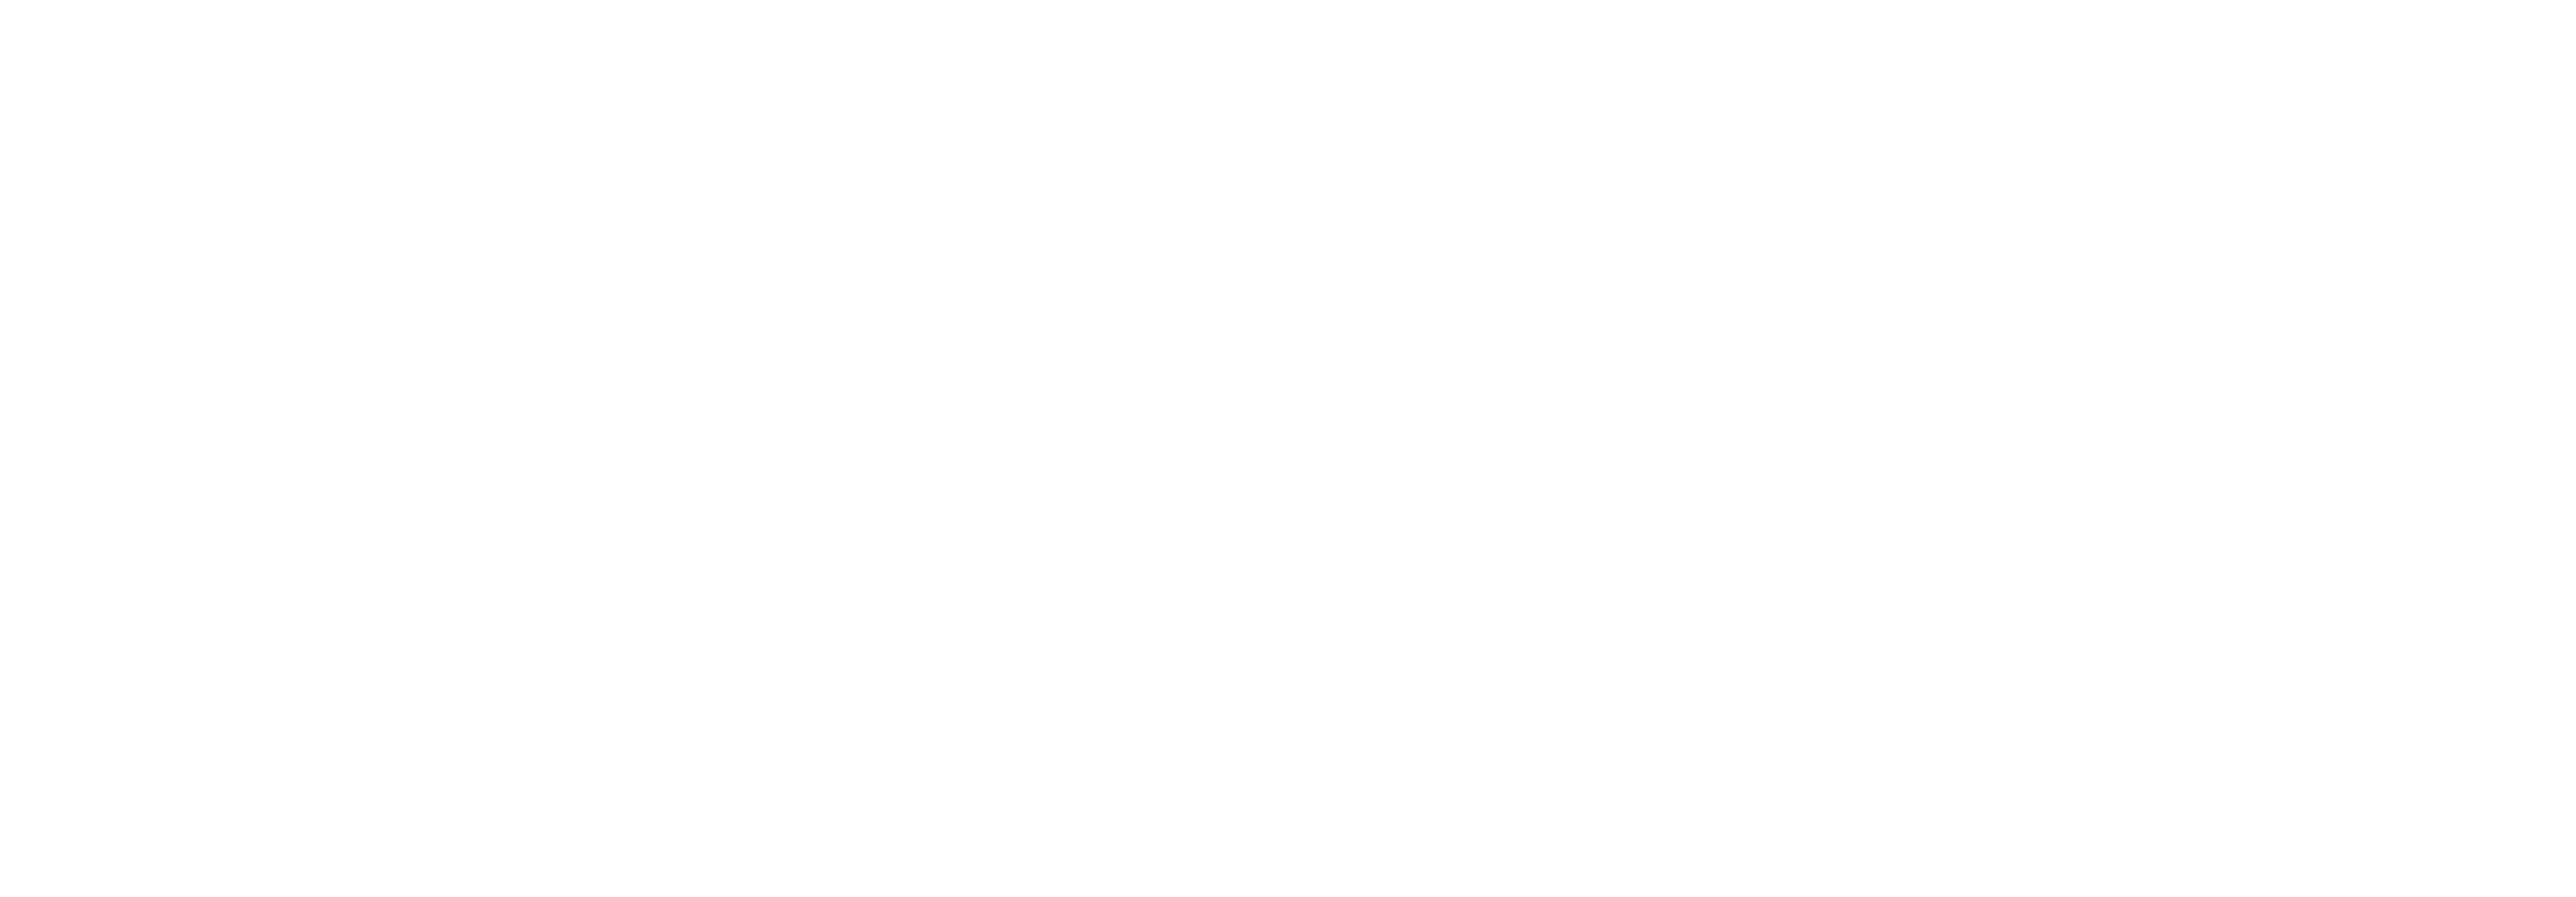 Lilly and U.S. Olympic and U.S. Paralympic Teams logos